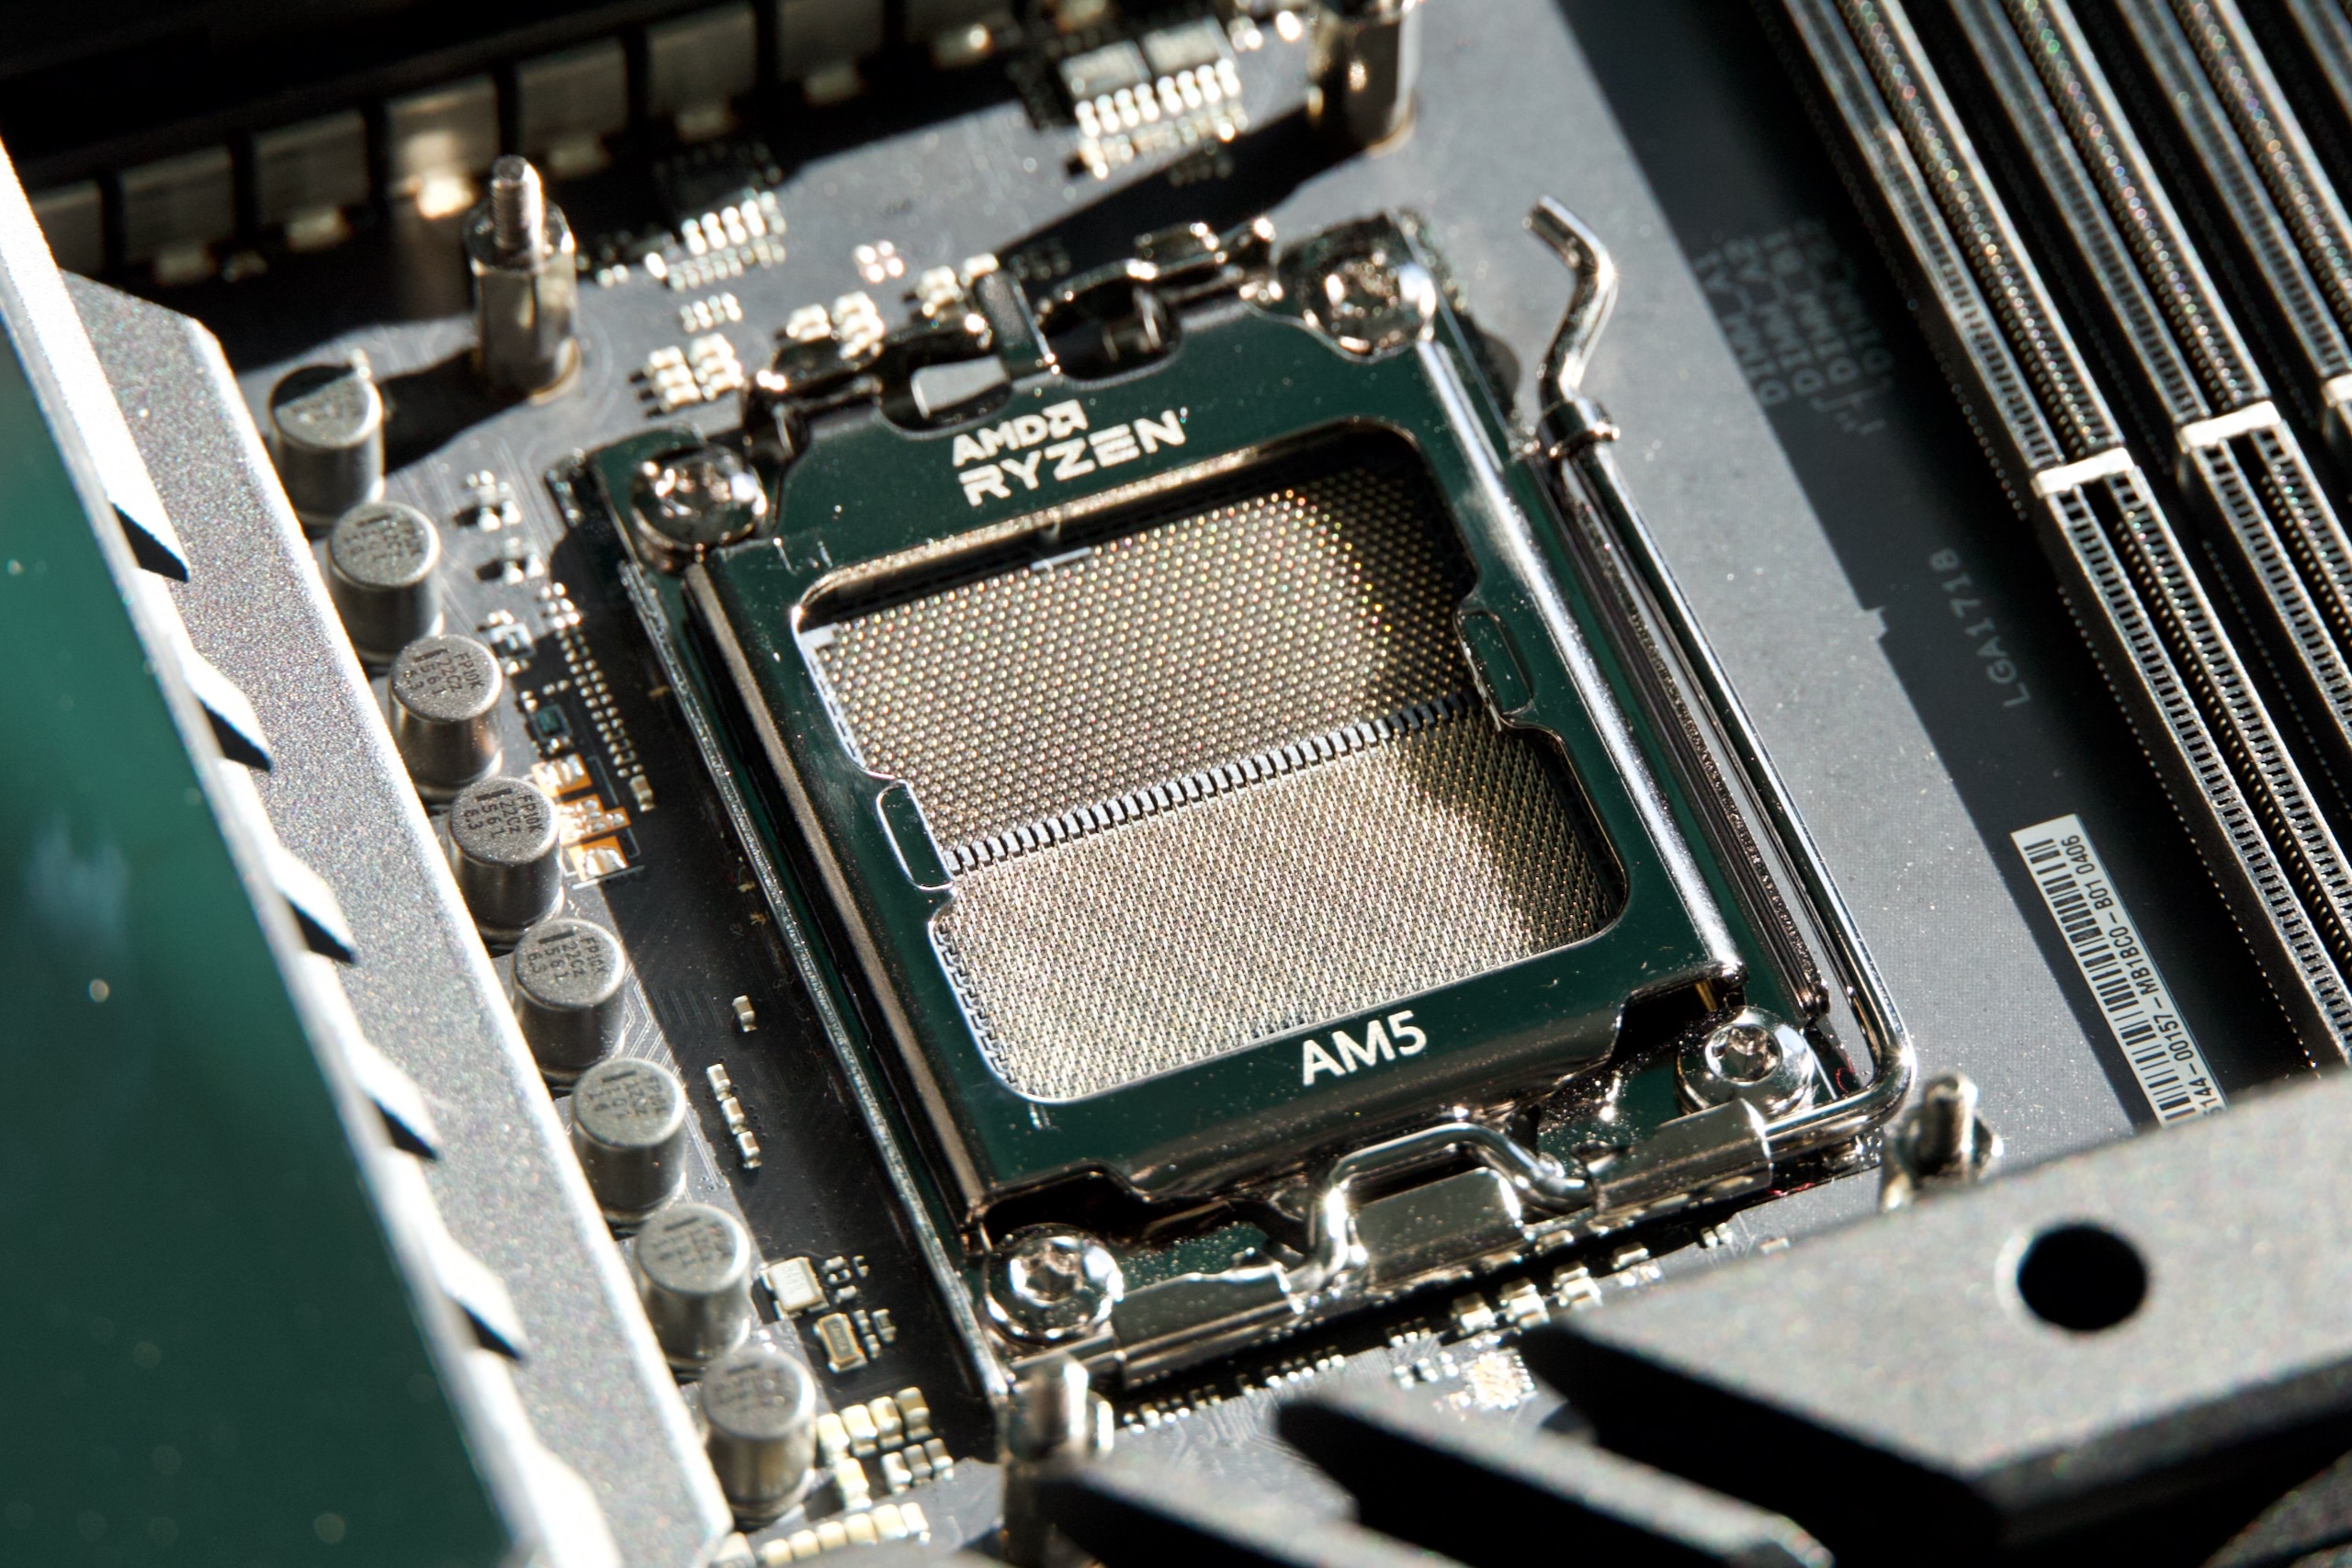 How high pin-count socket connectors are supporting new processor